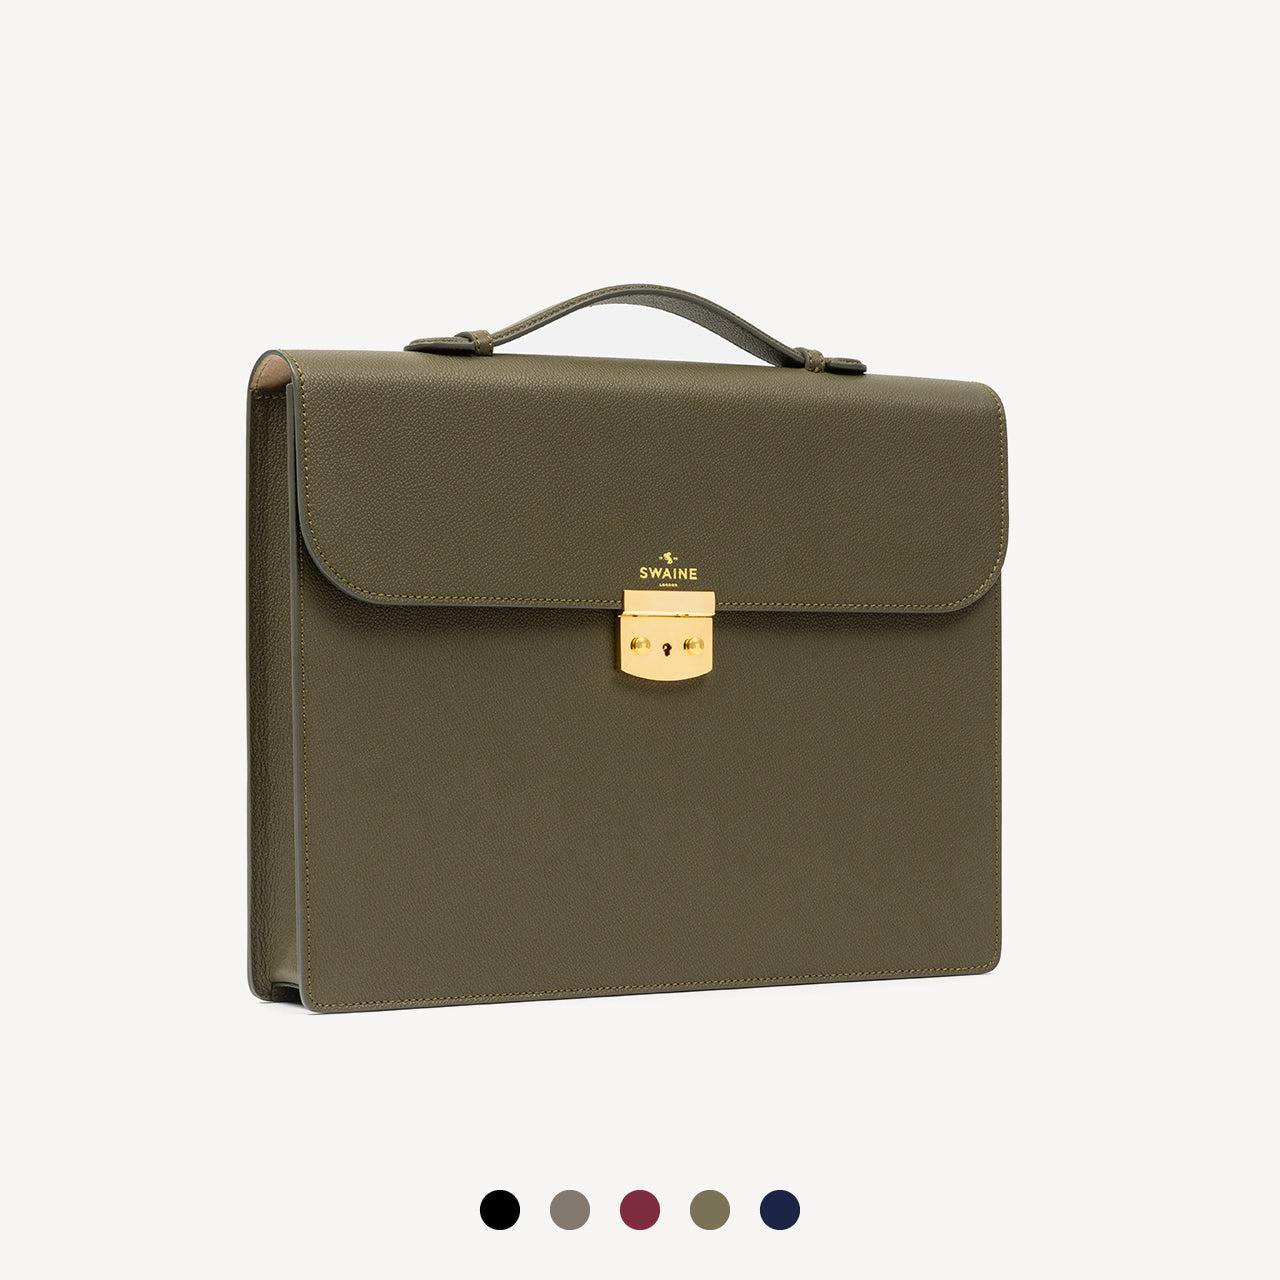 Louis Vuitton Olive Green Leather Robusto I Briefcase Louis